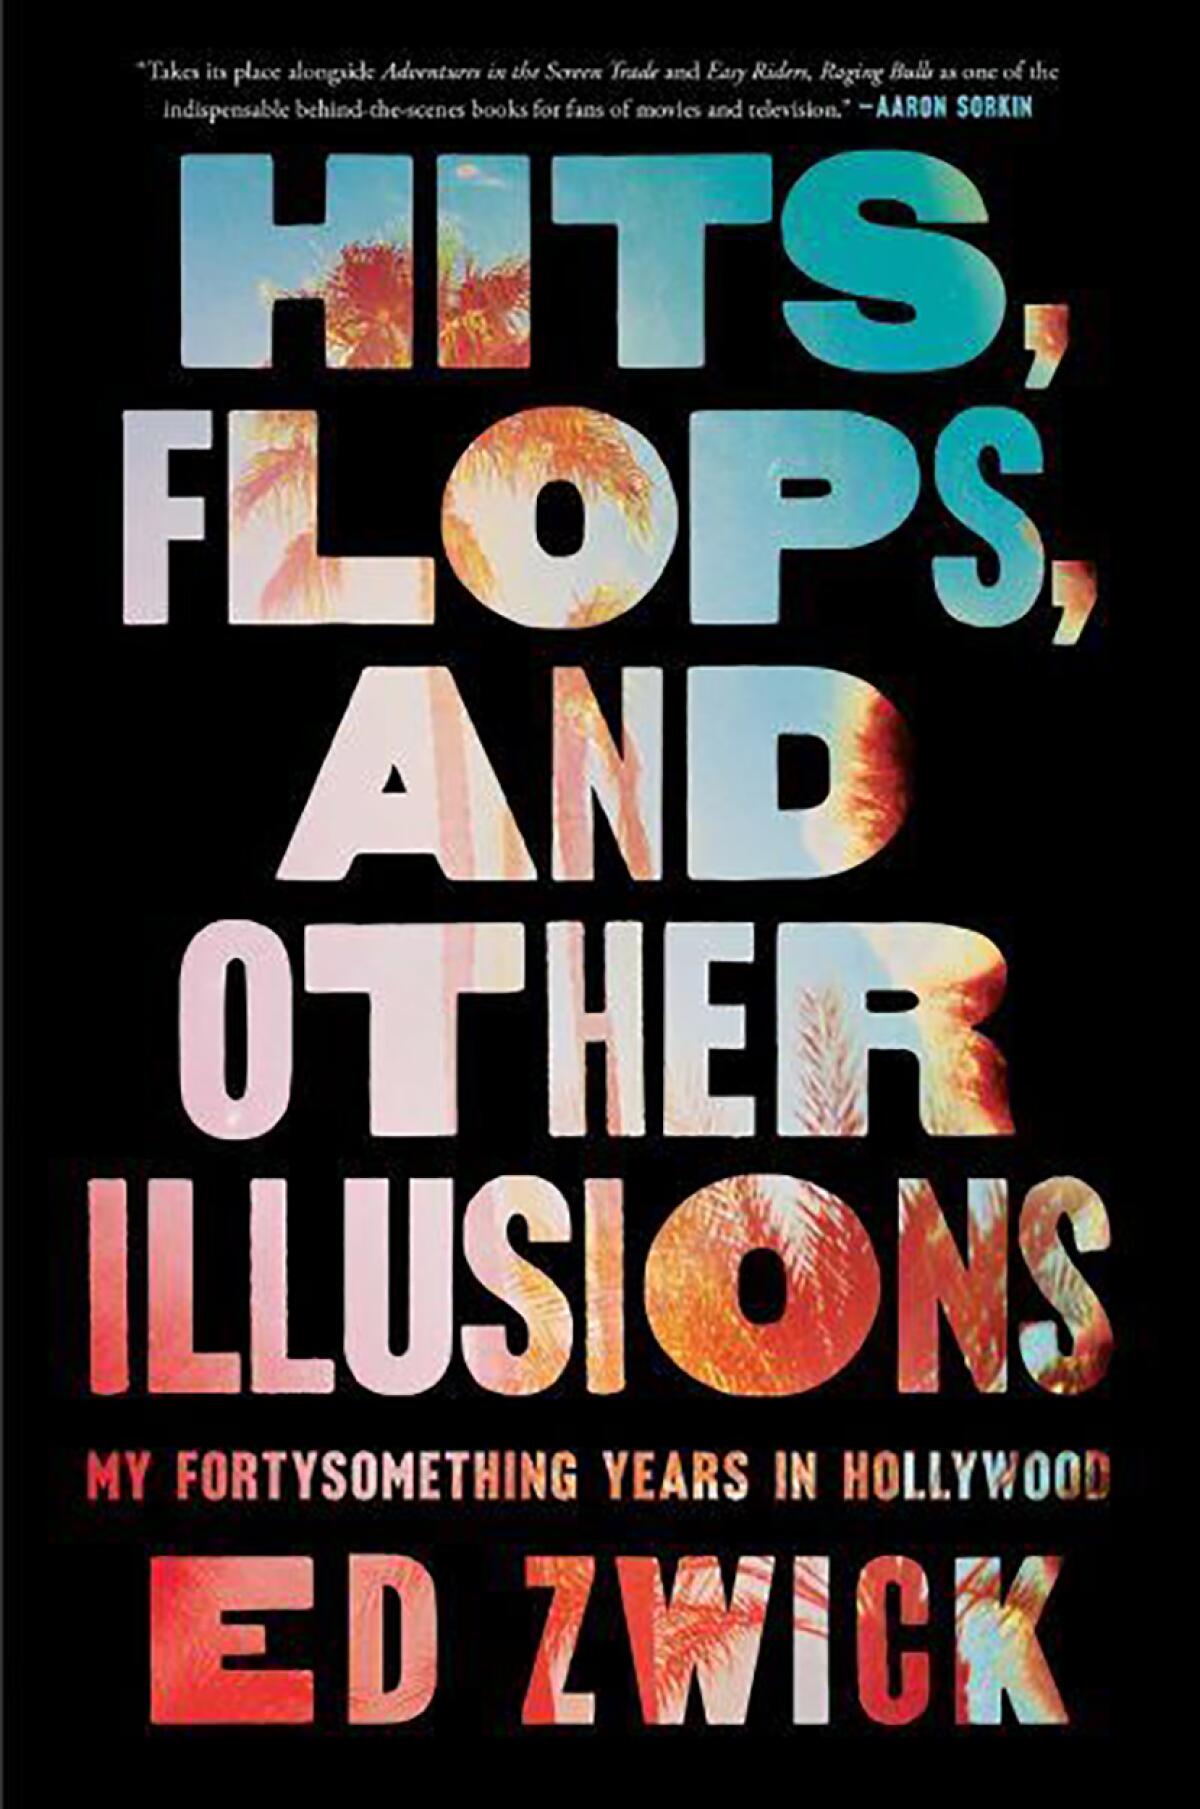 The book cover for Ed Zwick's memoir "Hits, Flops, and Other Illusions: My Fortysomething Years in Hollywood."